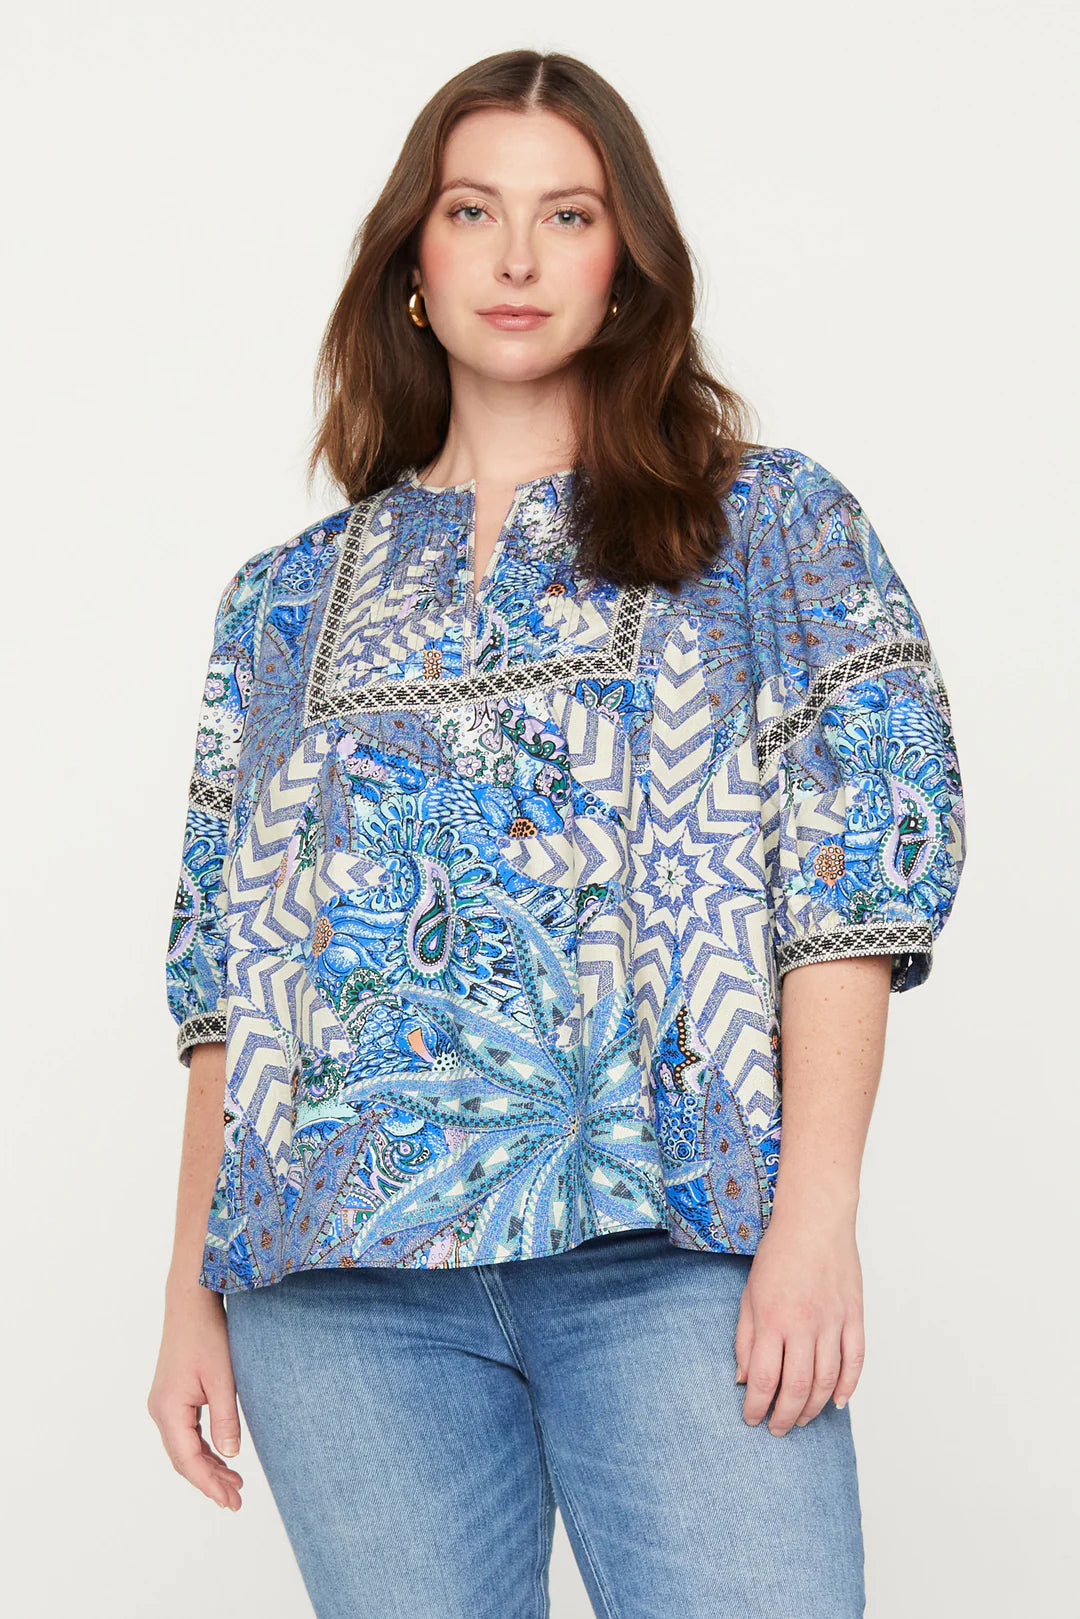 Marie Oliver Adina Top | Anise Breeze